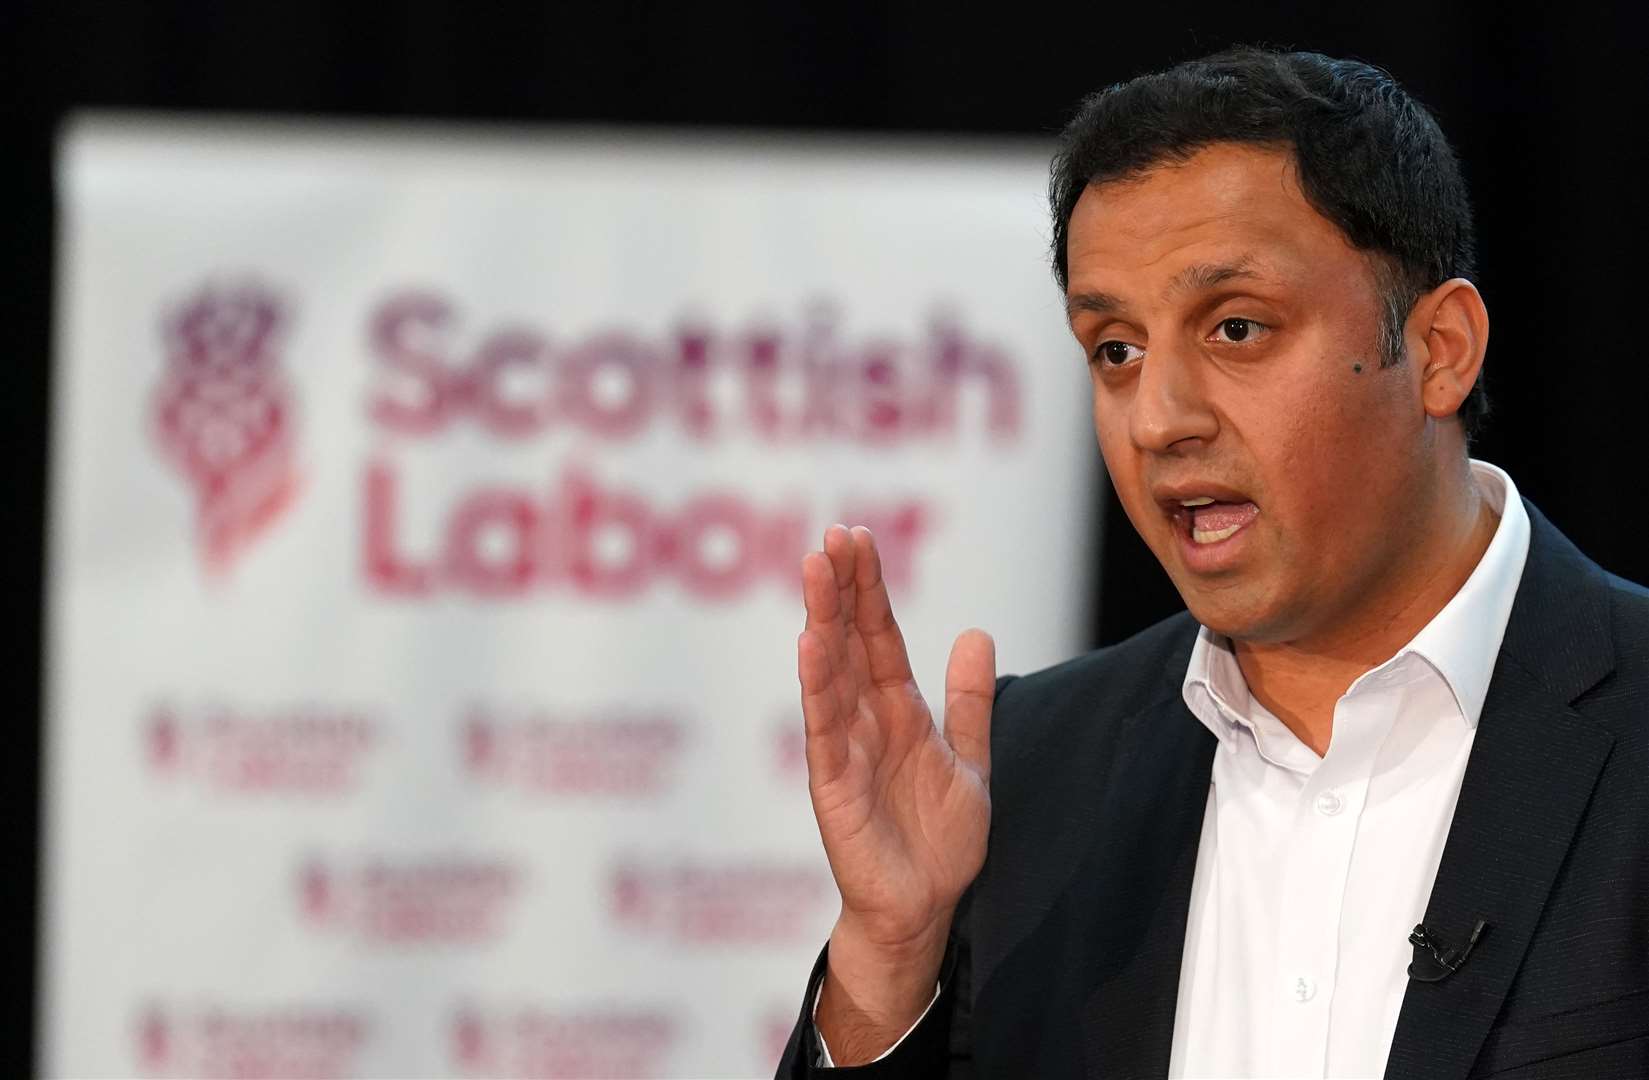 Anas Sarwar said the House of Lords ‘has no place in 21st Century politics’ (Andrew Milligan/PA)